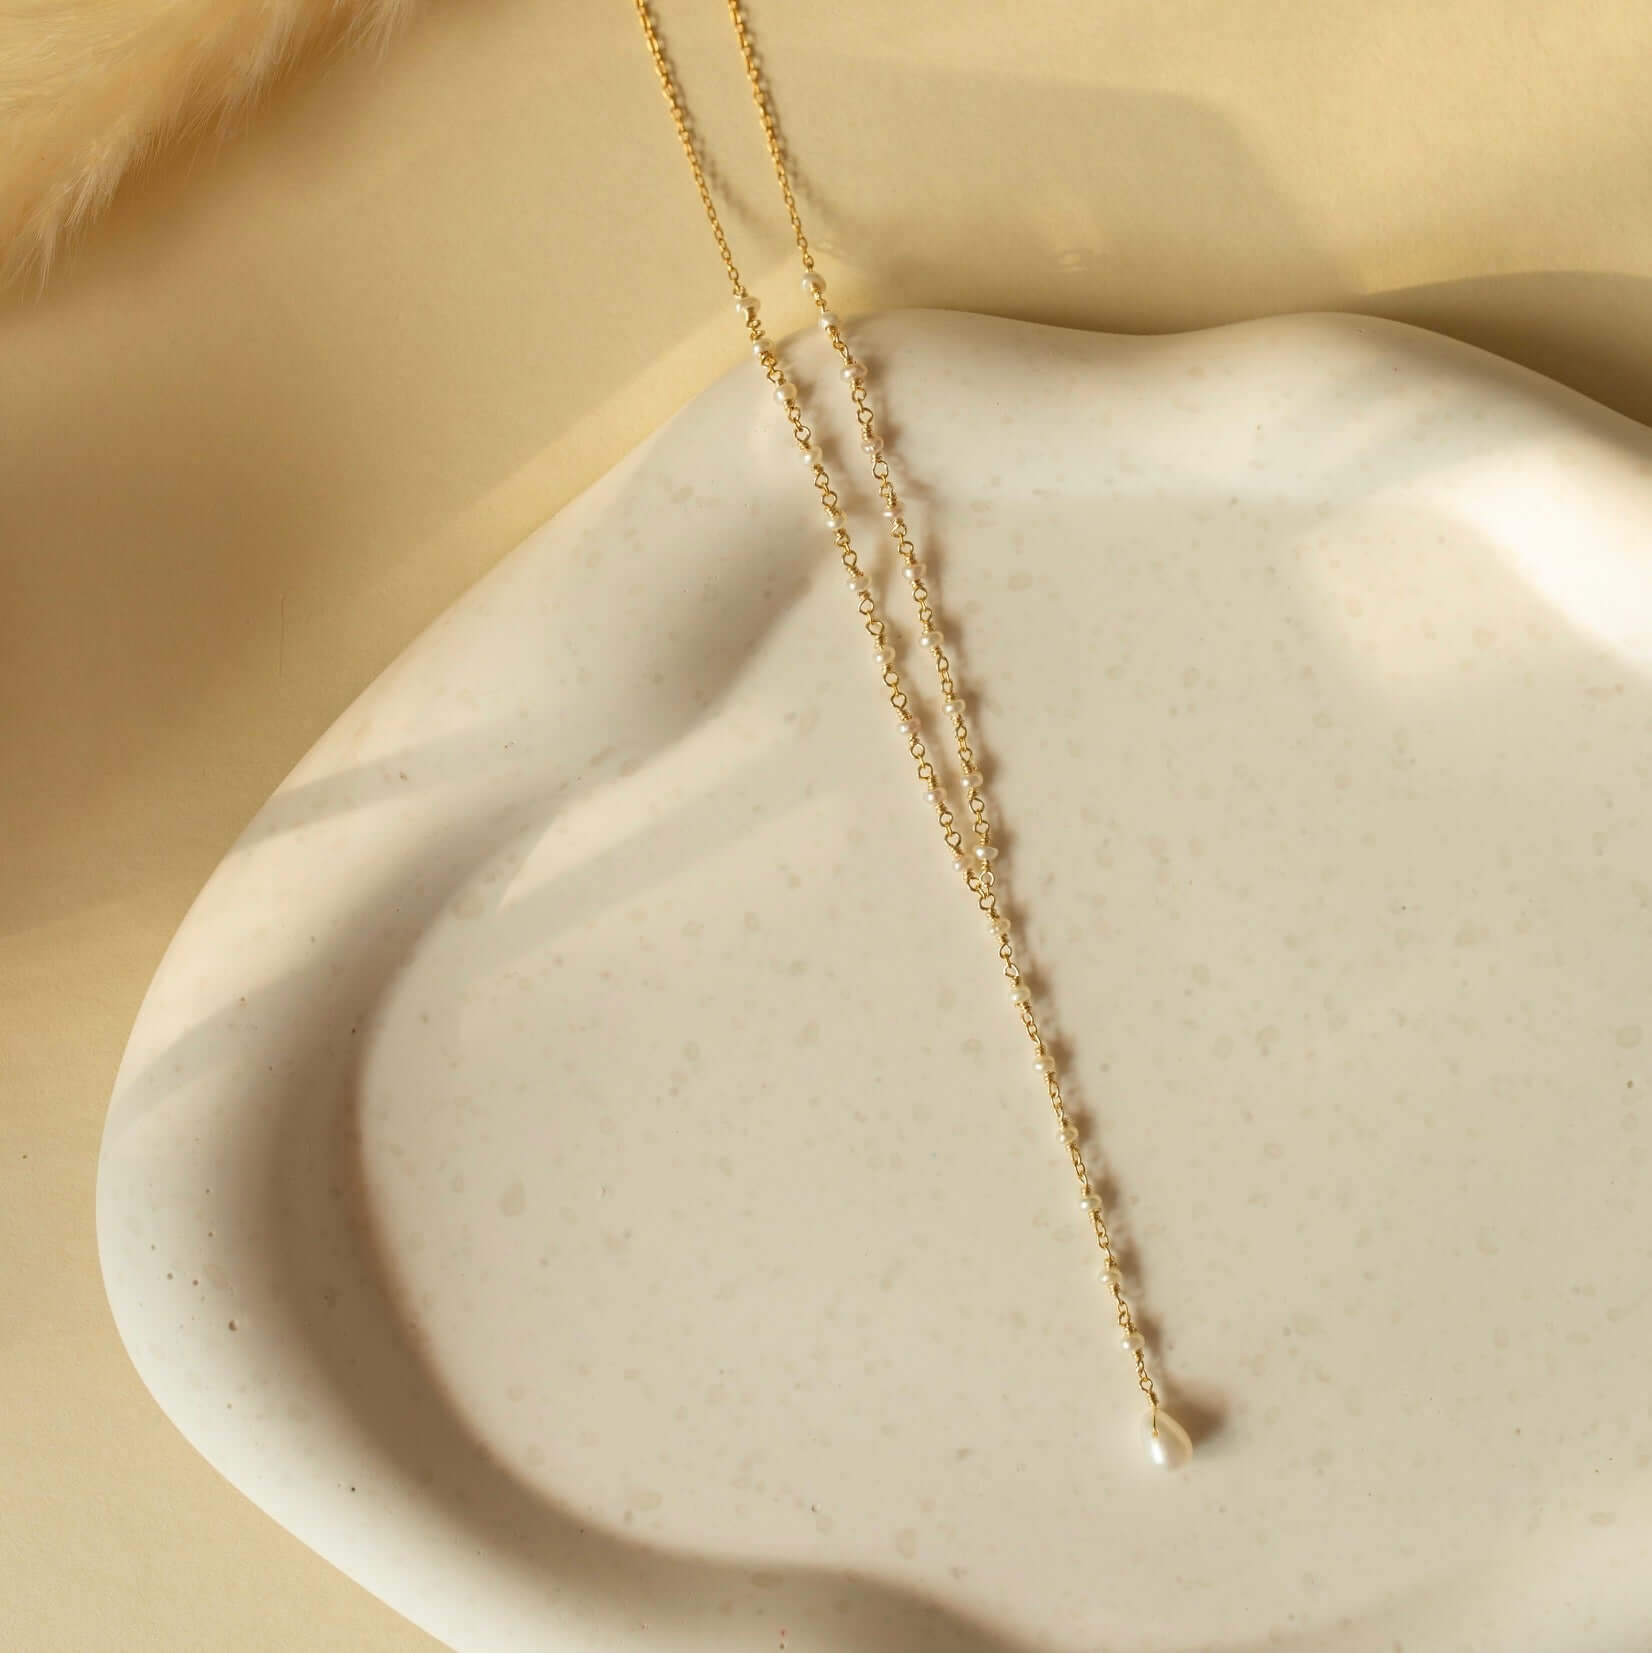 Simple and refined: necklace with lustrous freshwater pearls, a timeless classic.